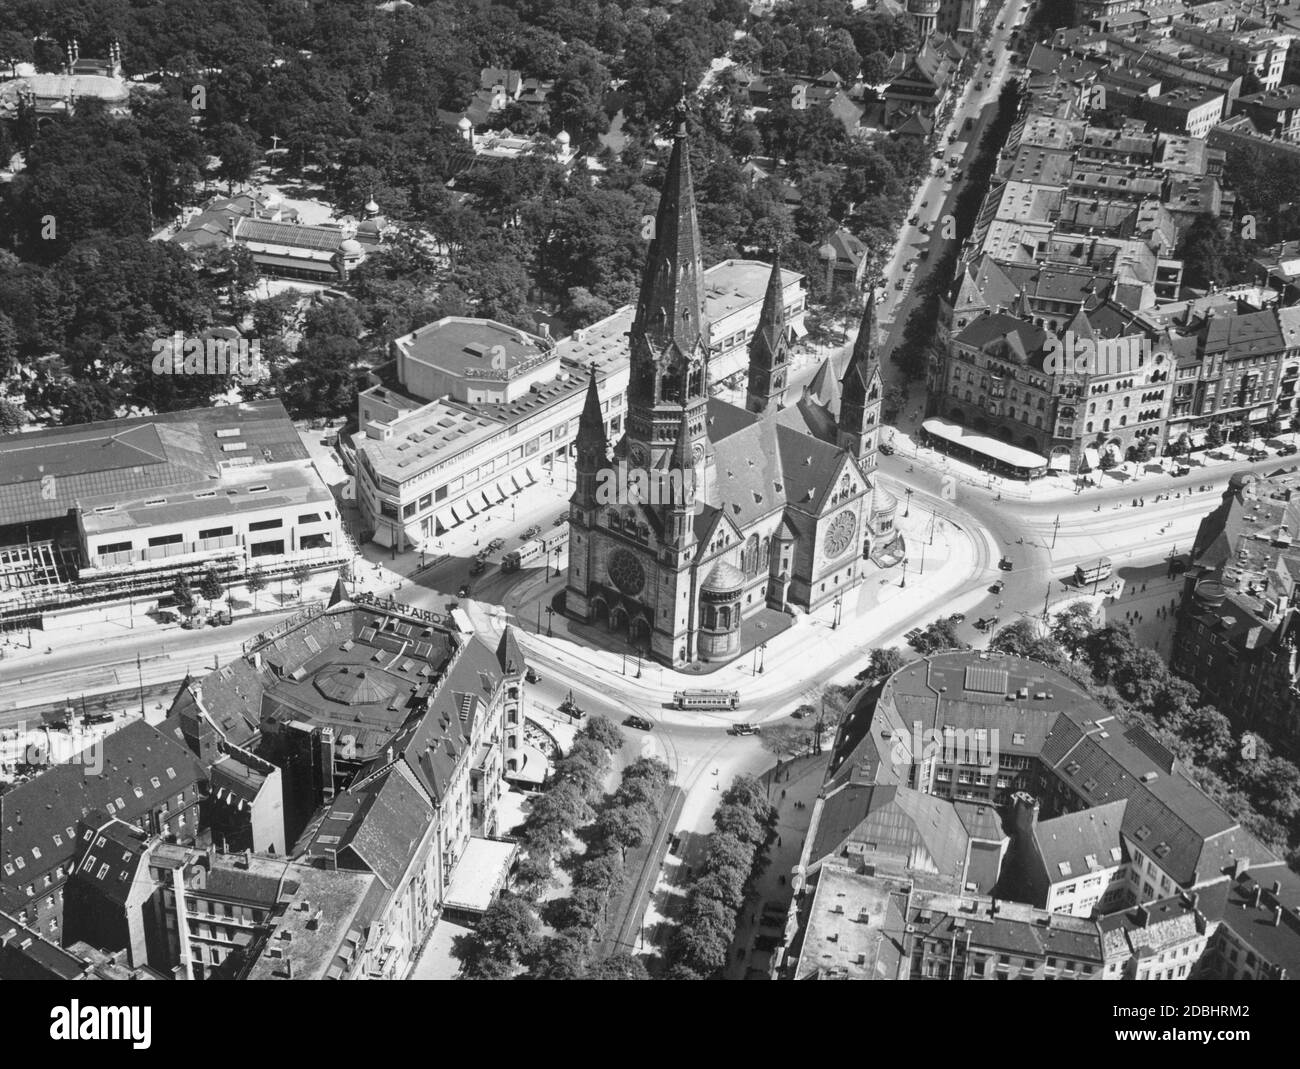 The photo shows the Kaiser Wilhelm Memorial Church at Auguste-Viktoria-Platz (today: Breitscheidplatz) in Berlin in 1938, with Budapester Strasse, Tauentzienstrasse, Rankestrasse, Kurfuerstendamm and Hardenbergstrasse leading towards the square (clockwise from above). The square is lined by the buildings: Zweites Romanisches Haus (top right), Romanisches Haus (bottom left), Ufa-Palast am Zoo (left), Capitol am Zoo (right next to it) and part of the Zoological Garden (top left). Stock Photo